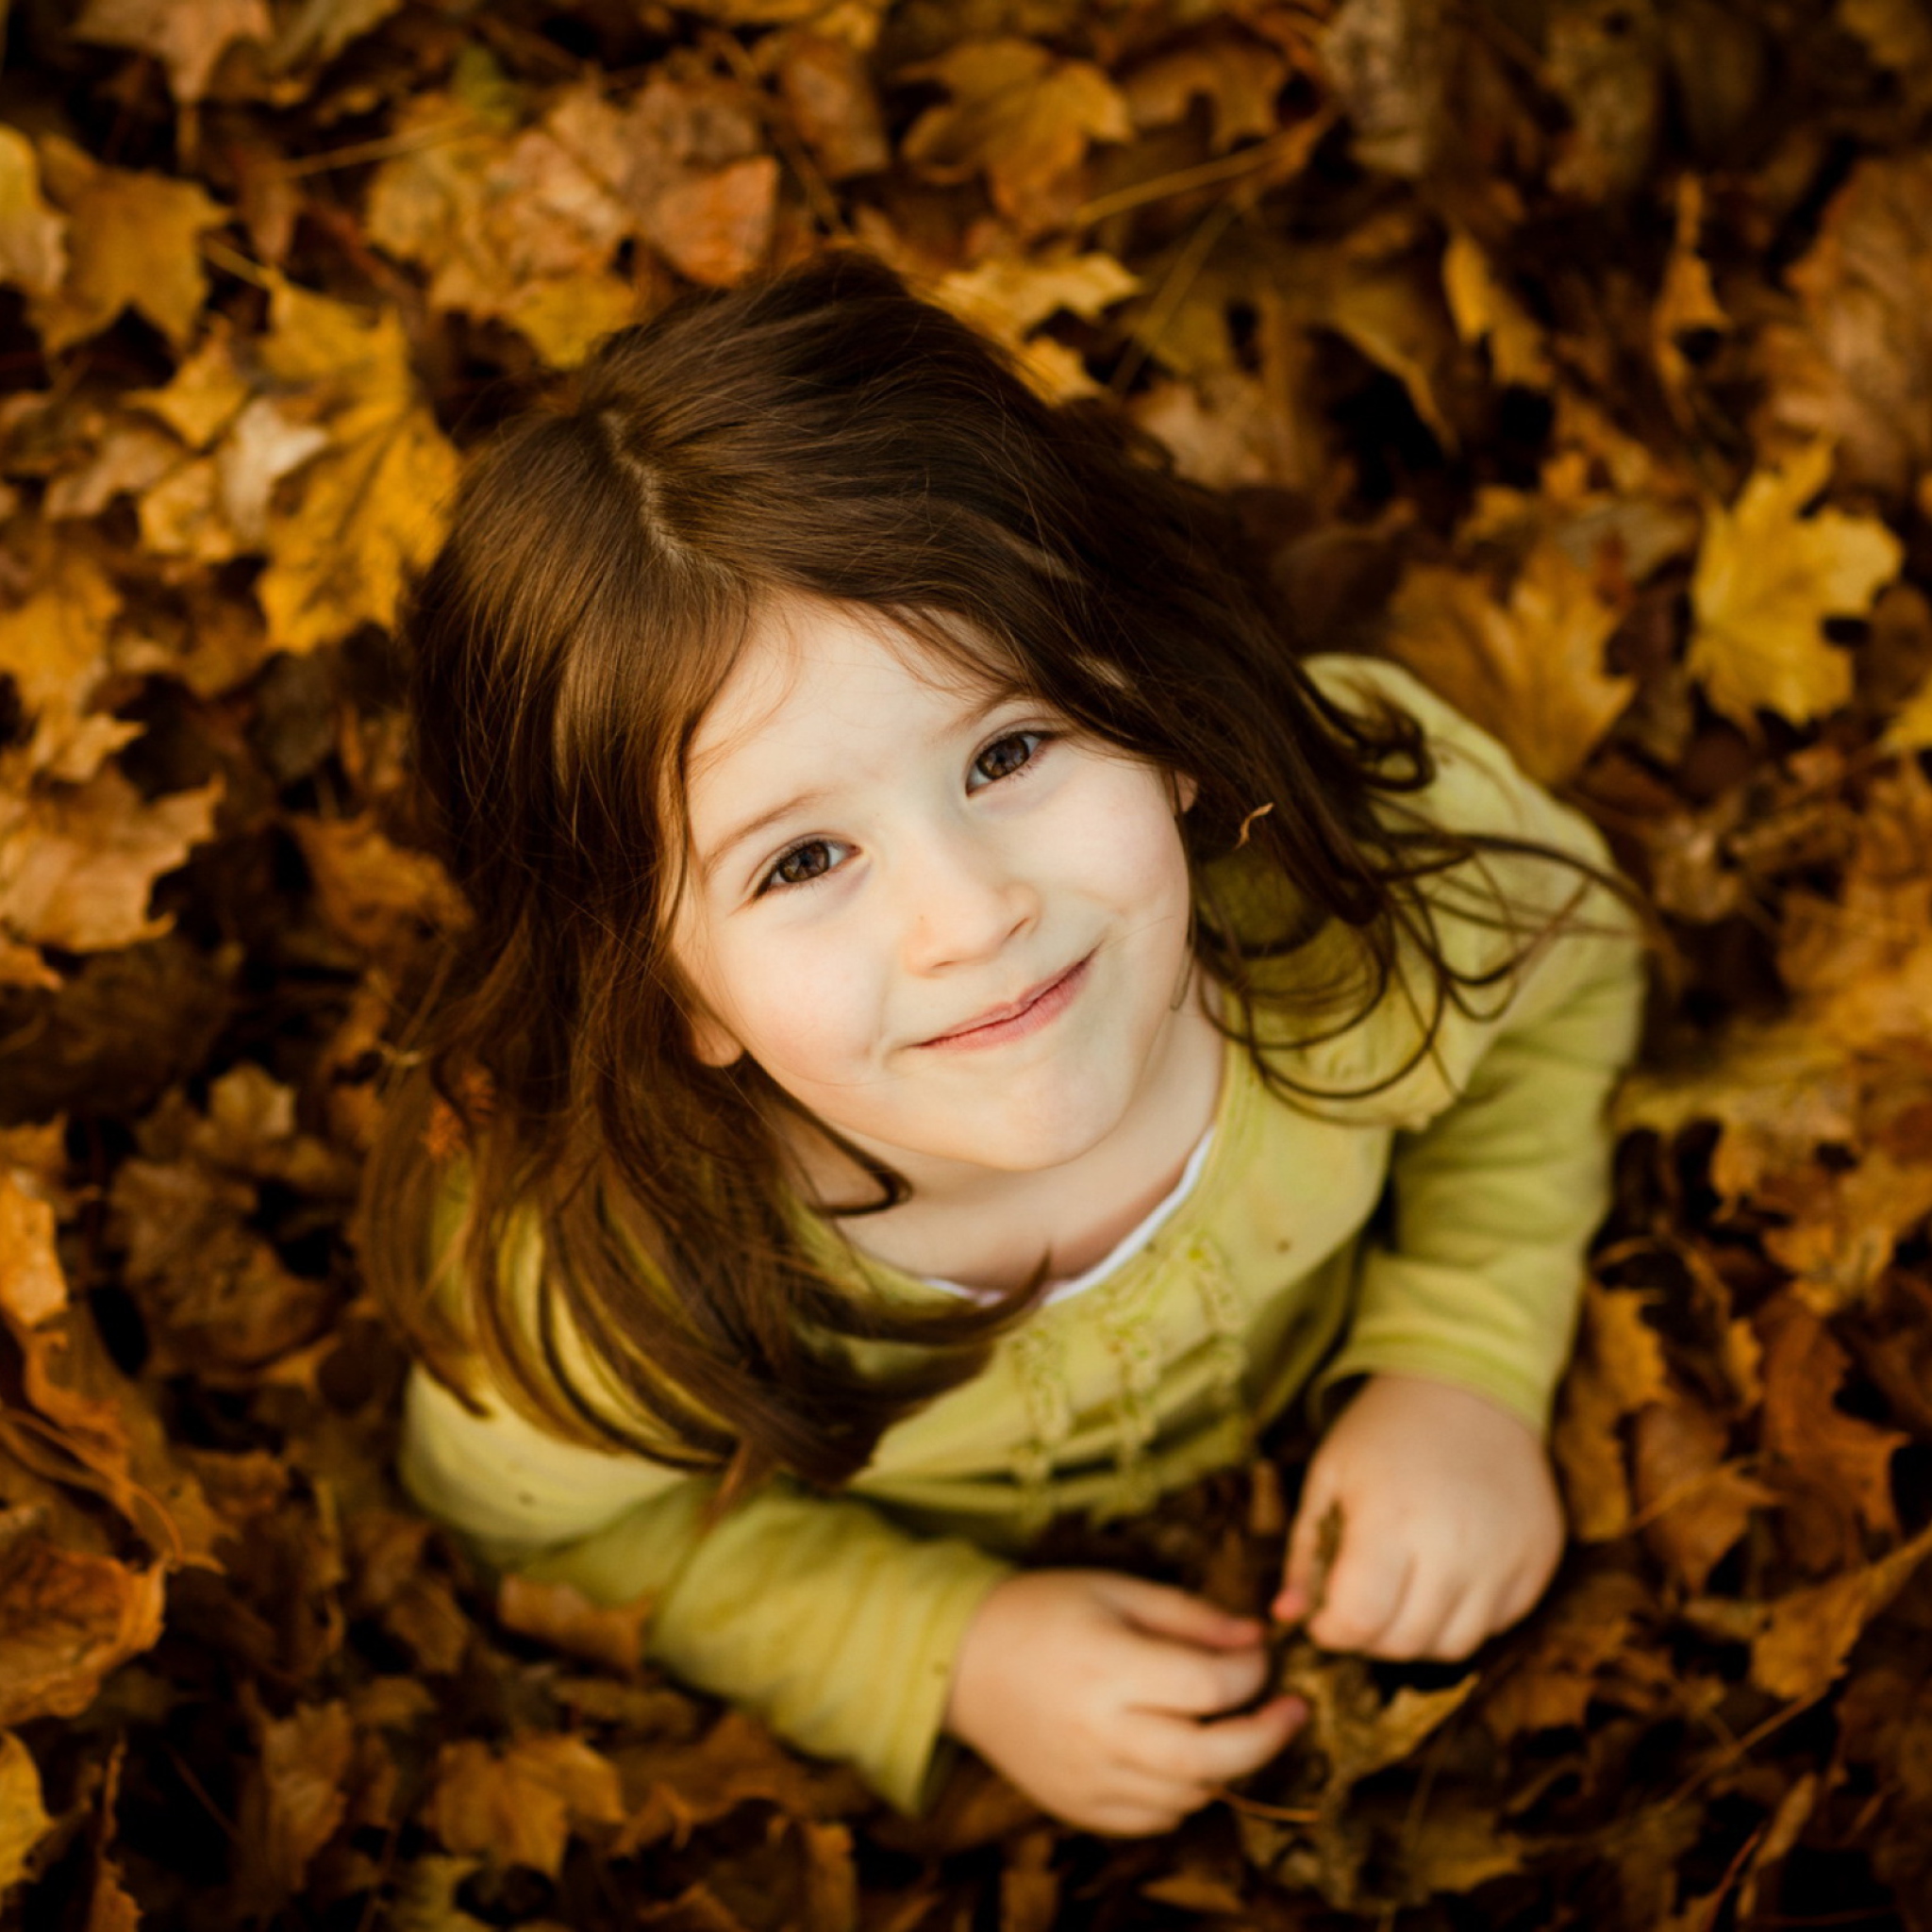 Child In Leaves wallpaper 2048x2048